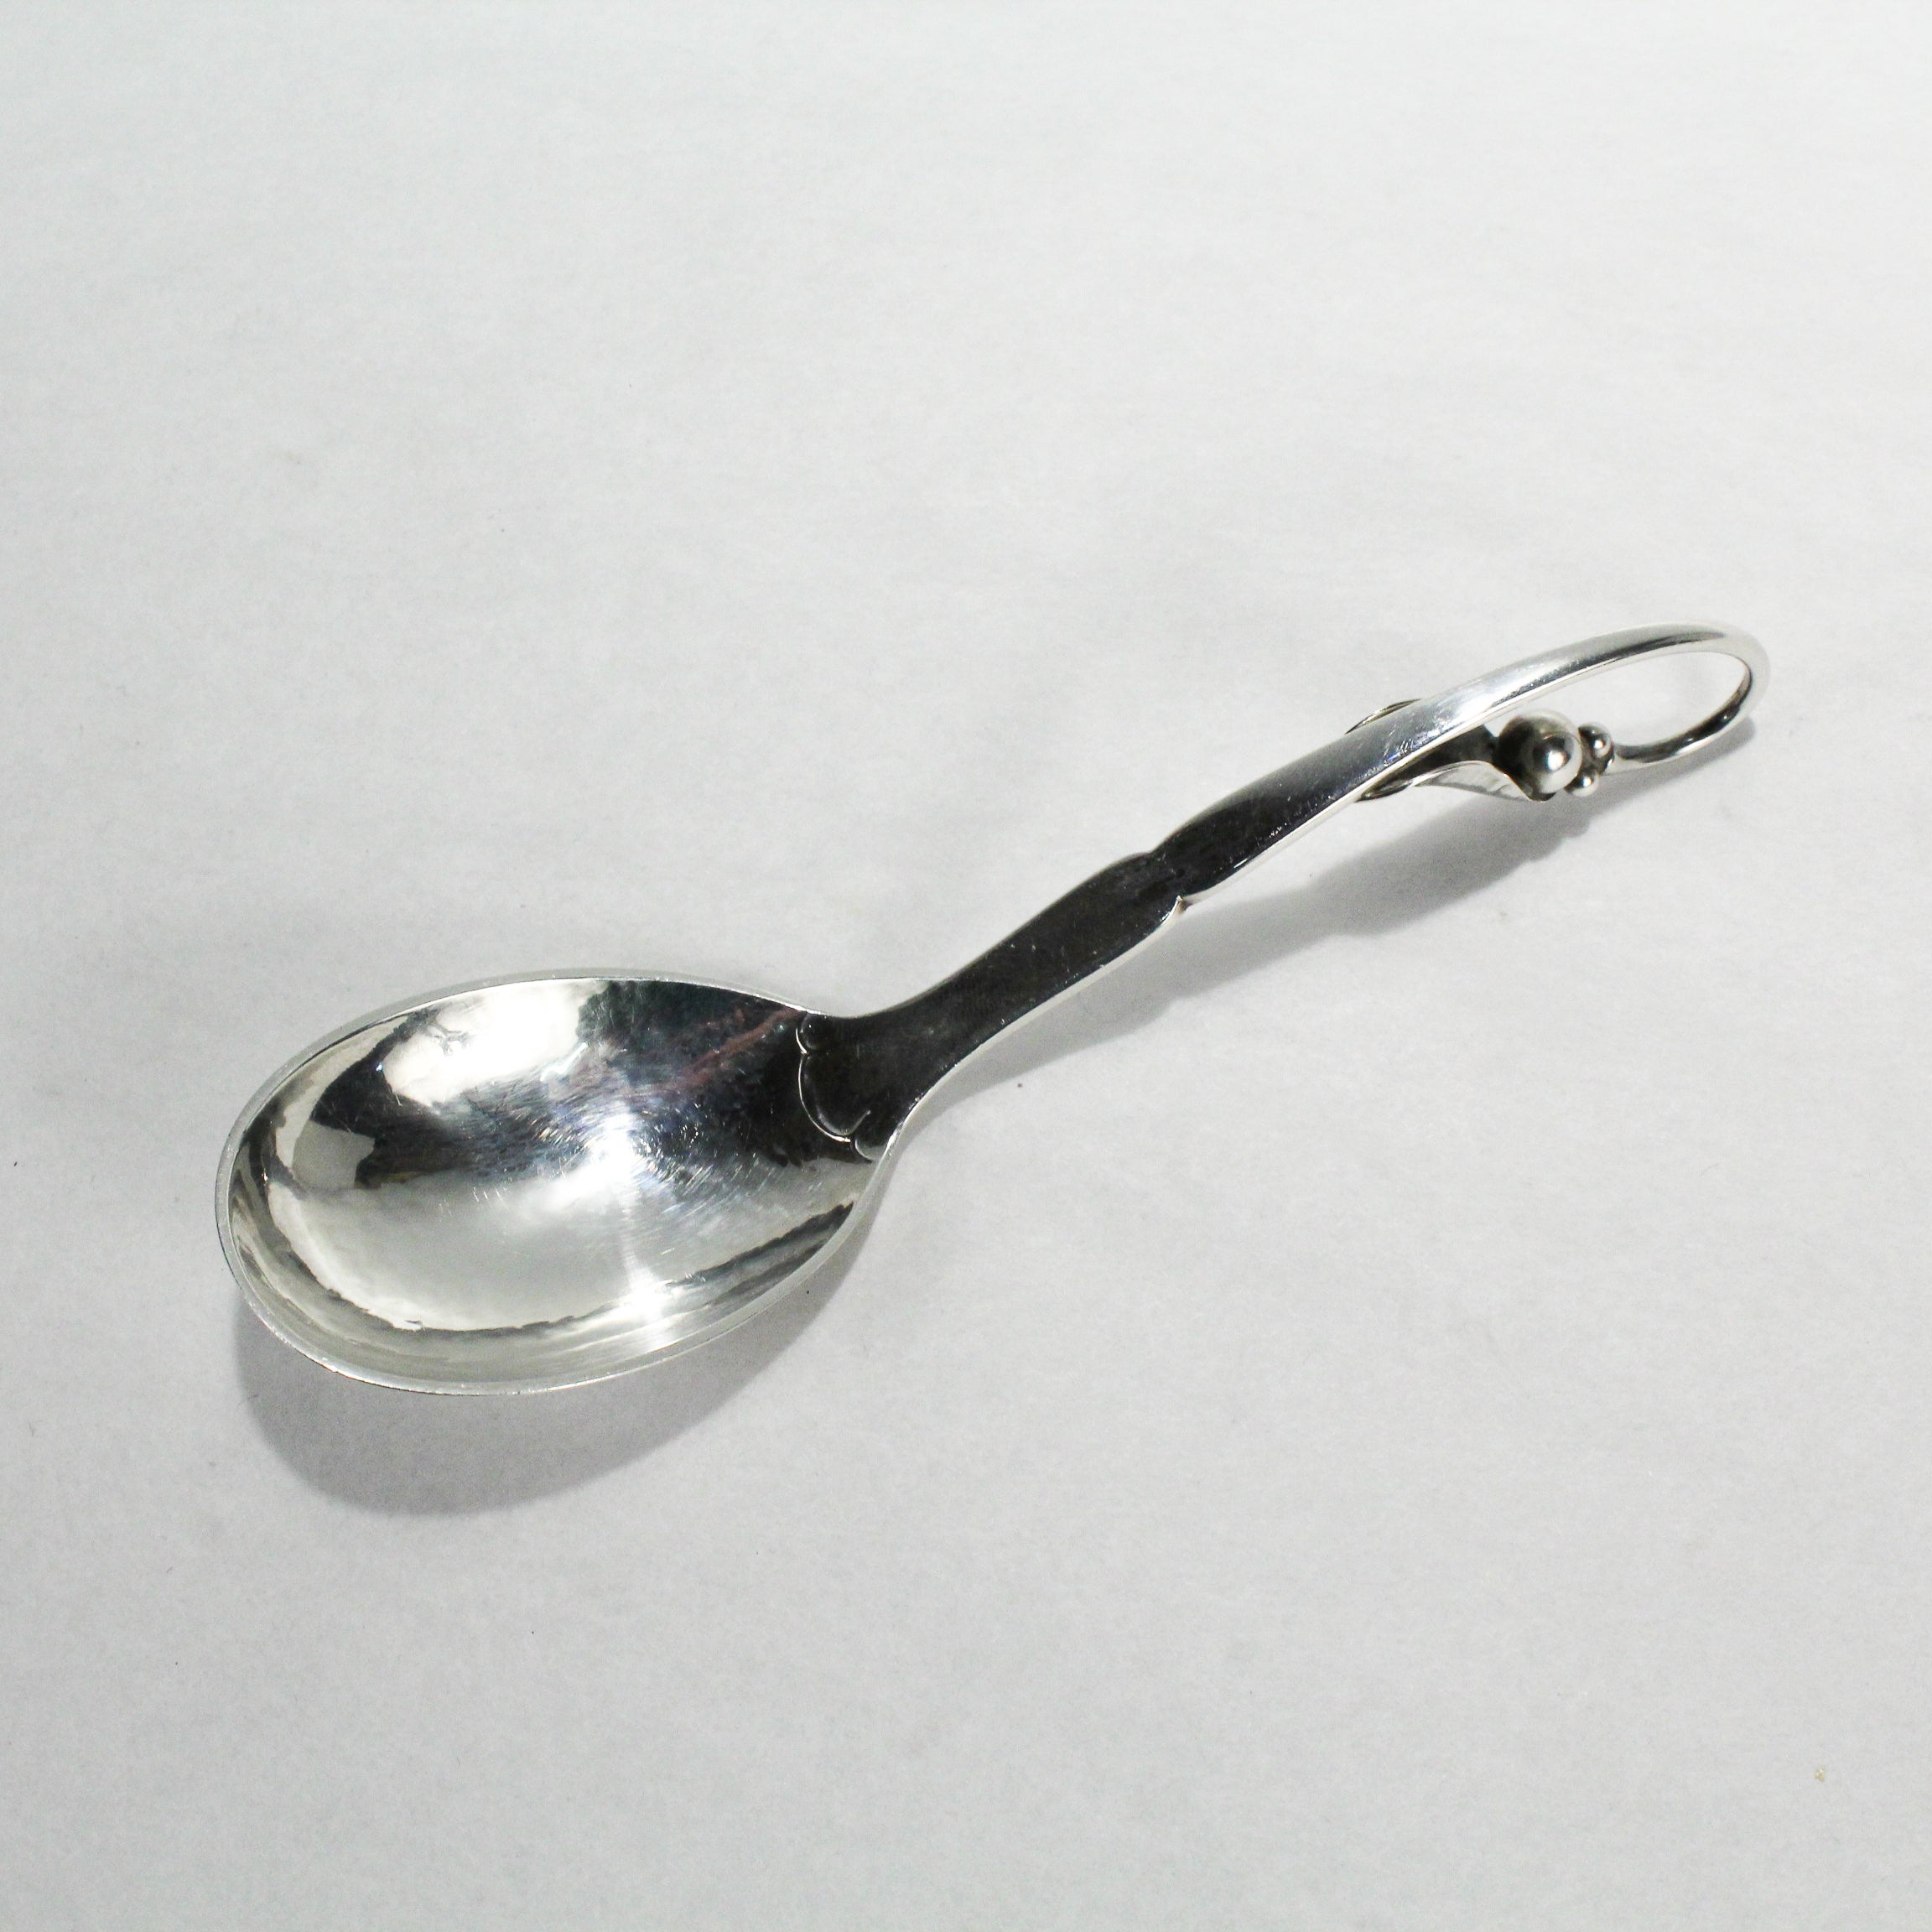 A fine vintage ornamental sugar spoon.

By Georg Jensen.

In sterling silver.

Model no. 21. 

Designed by Georg Jensen.

With the post-1945 factory mark.

Simply a great spoon from Georg Jensen!

Date:
post 1945

Overall Condition:
It is in overall